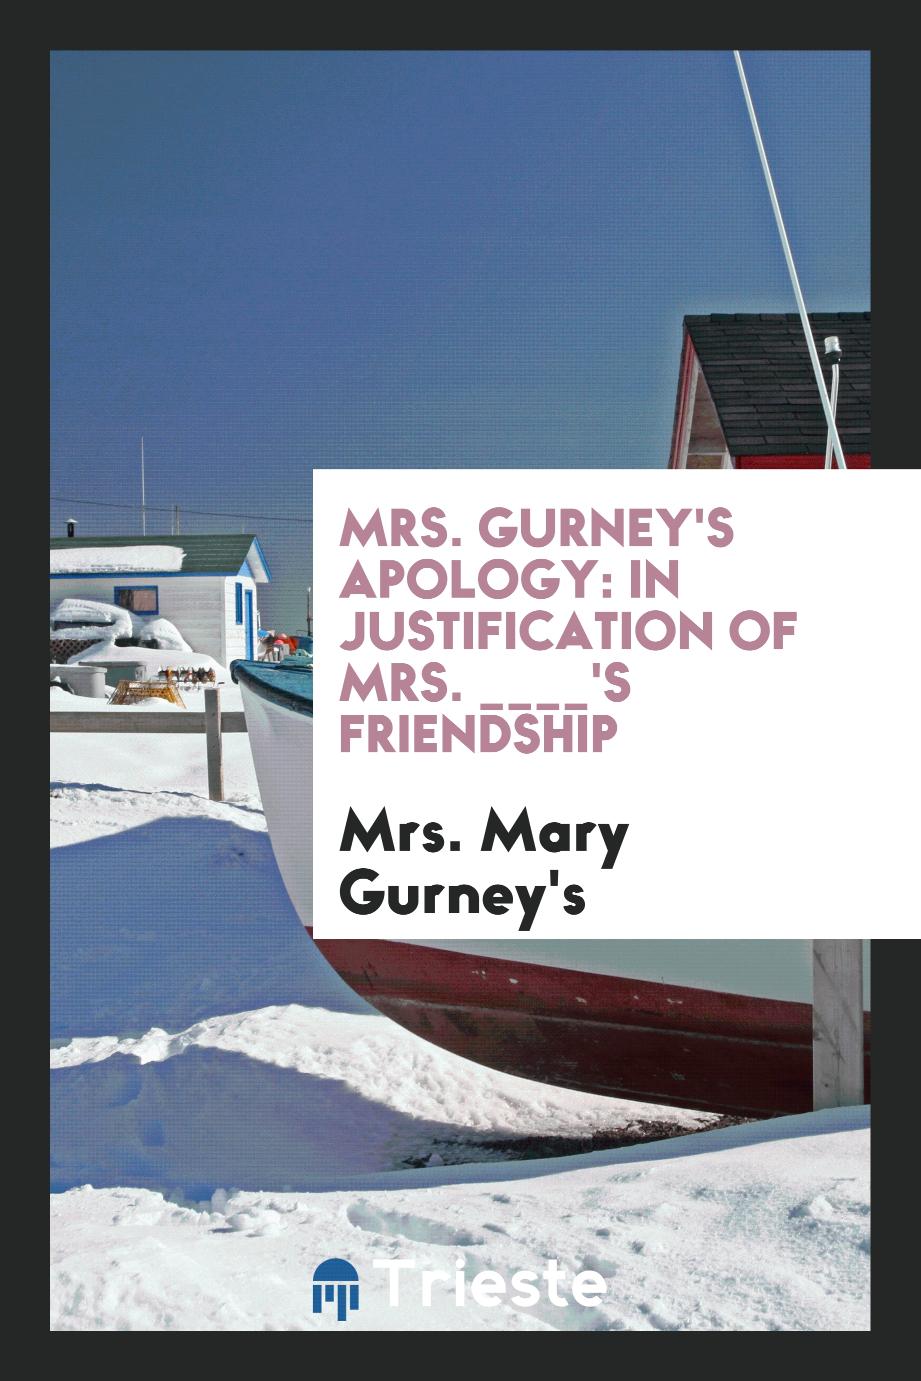 Mrs. Gurney's Apology: In Justification of Mrs. ____'s Friendship